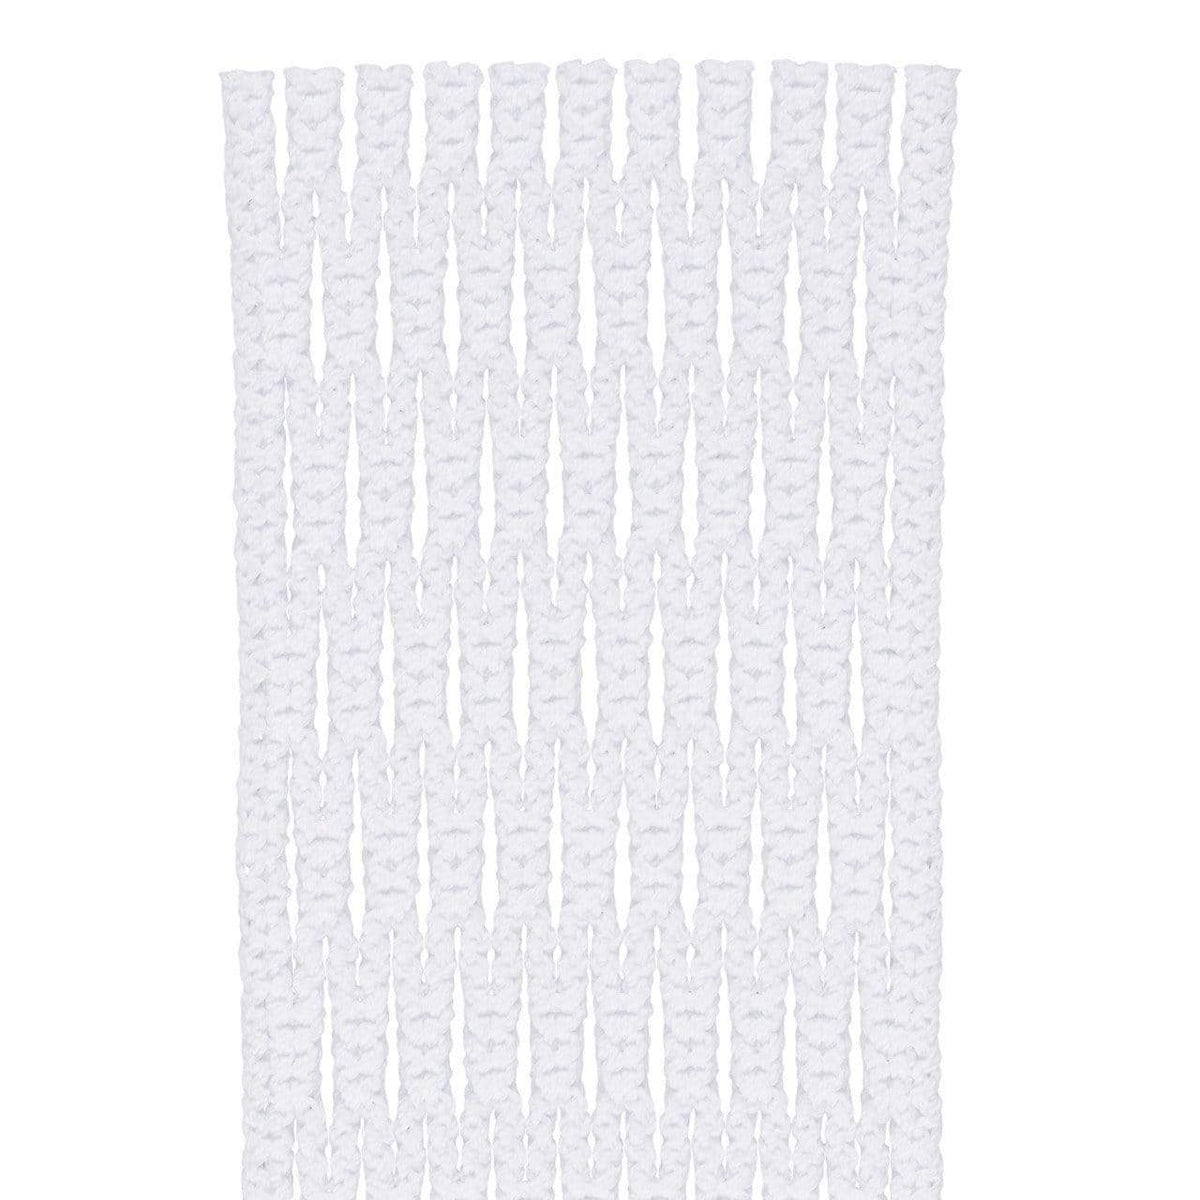 StringKing Stringing Supplies White / Semi-Soft StringKing Performance Type 3s Lacrosse Mesh from Lacrosse Fanatic